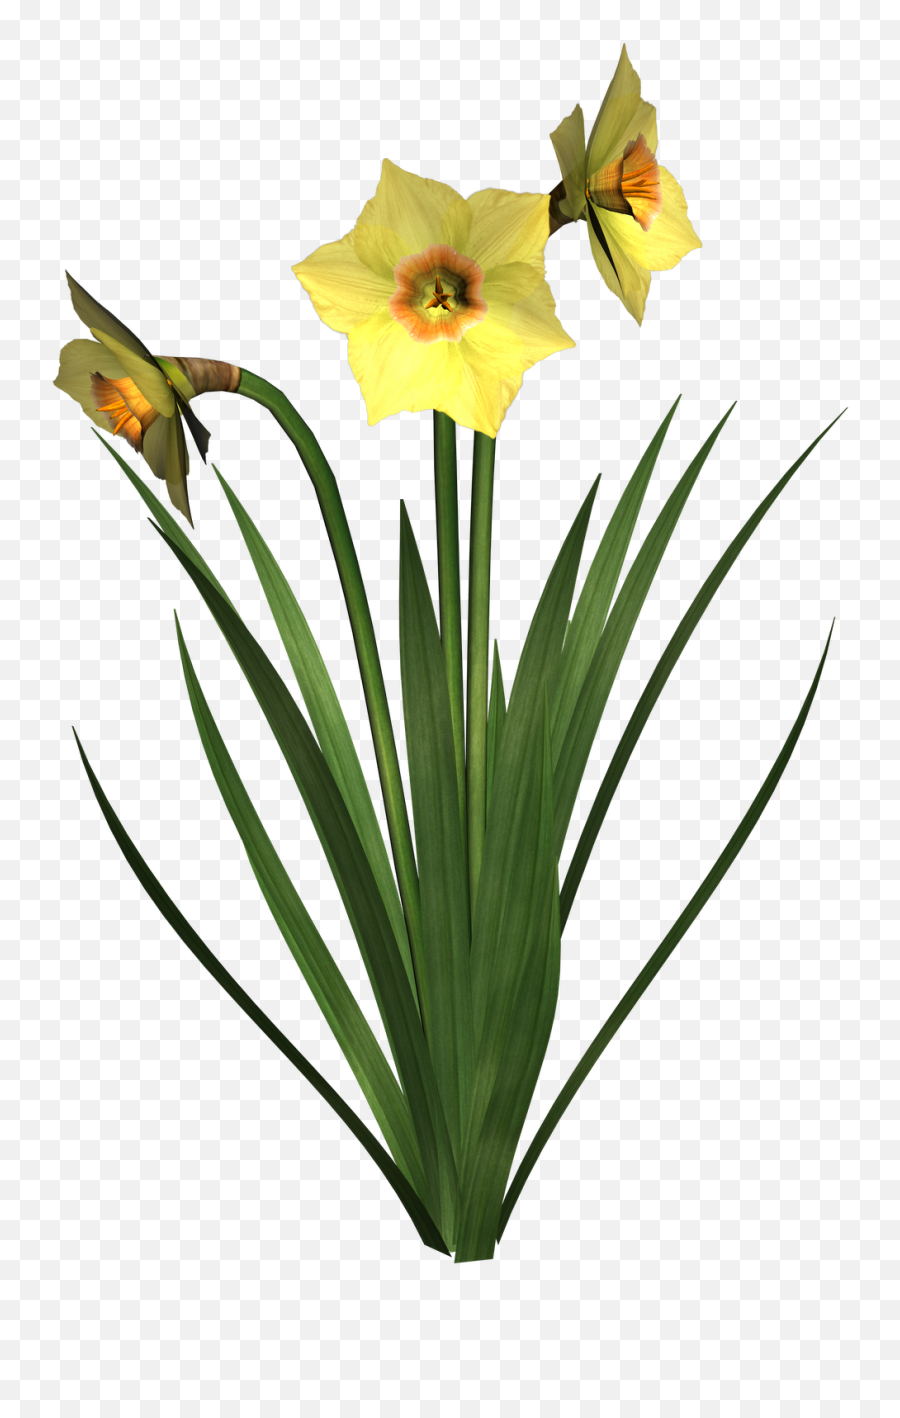 Plants Clipart Transparent Background - Daffodil Flower Transparent Background Png,Plant Transparent Background